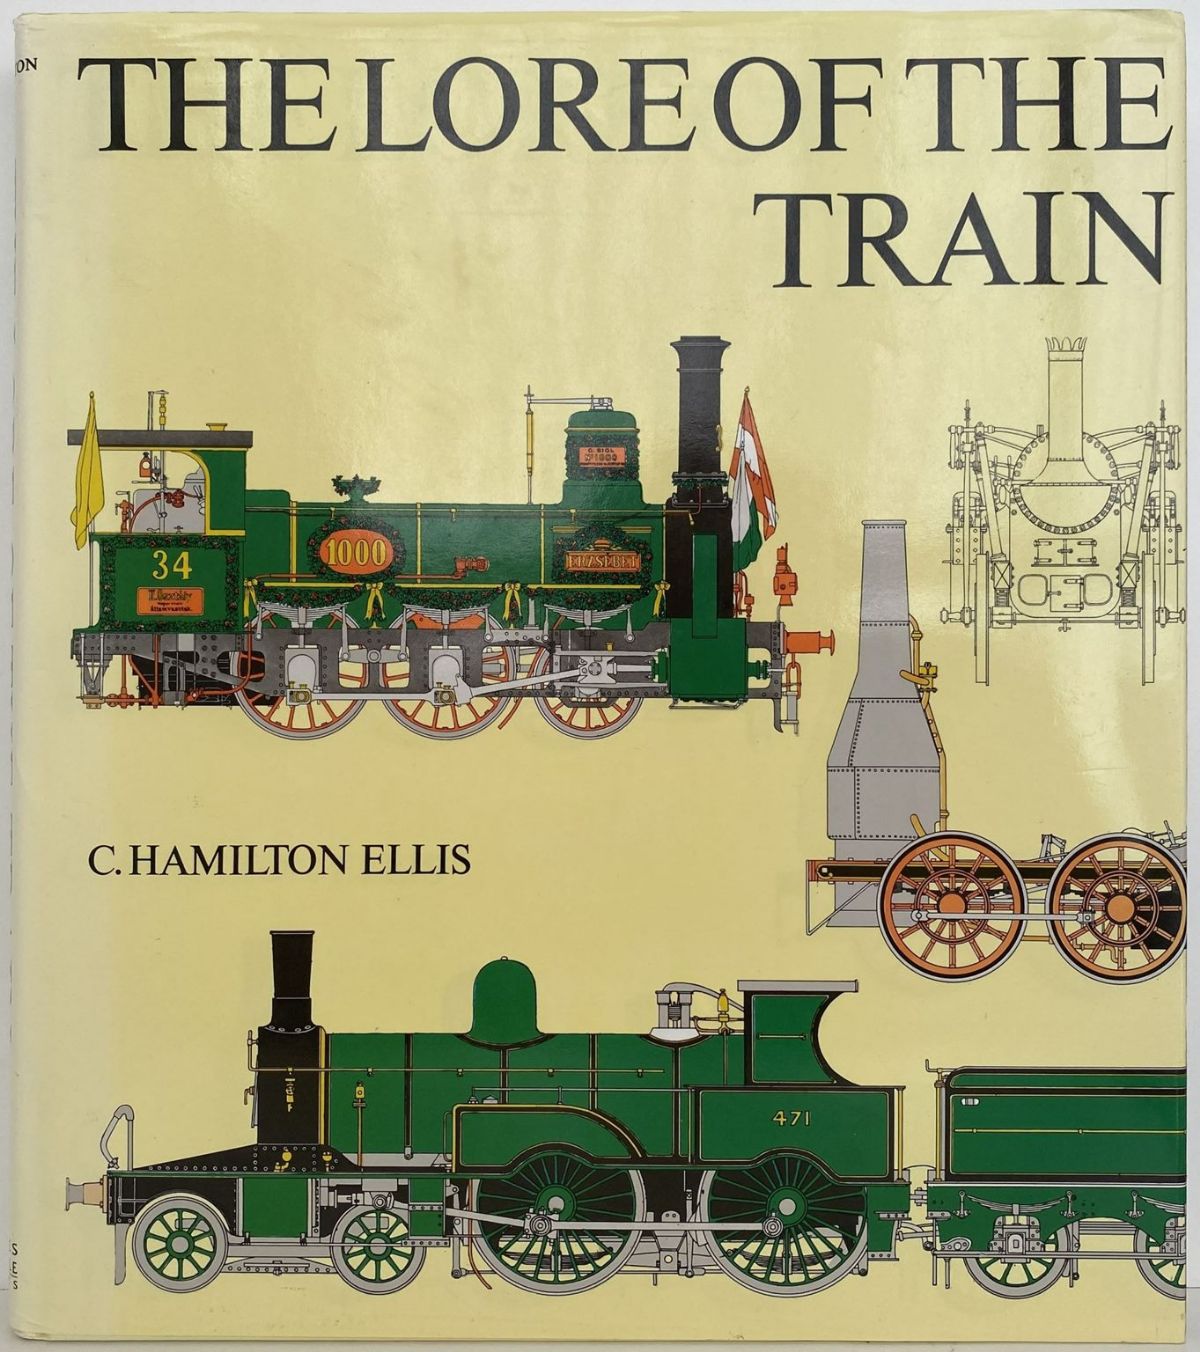 THE LORE OF THE TRAIN